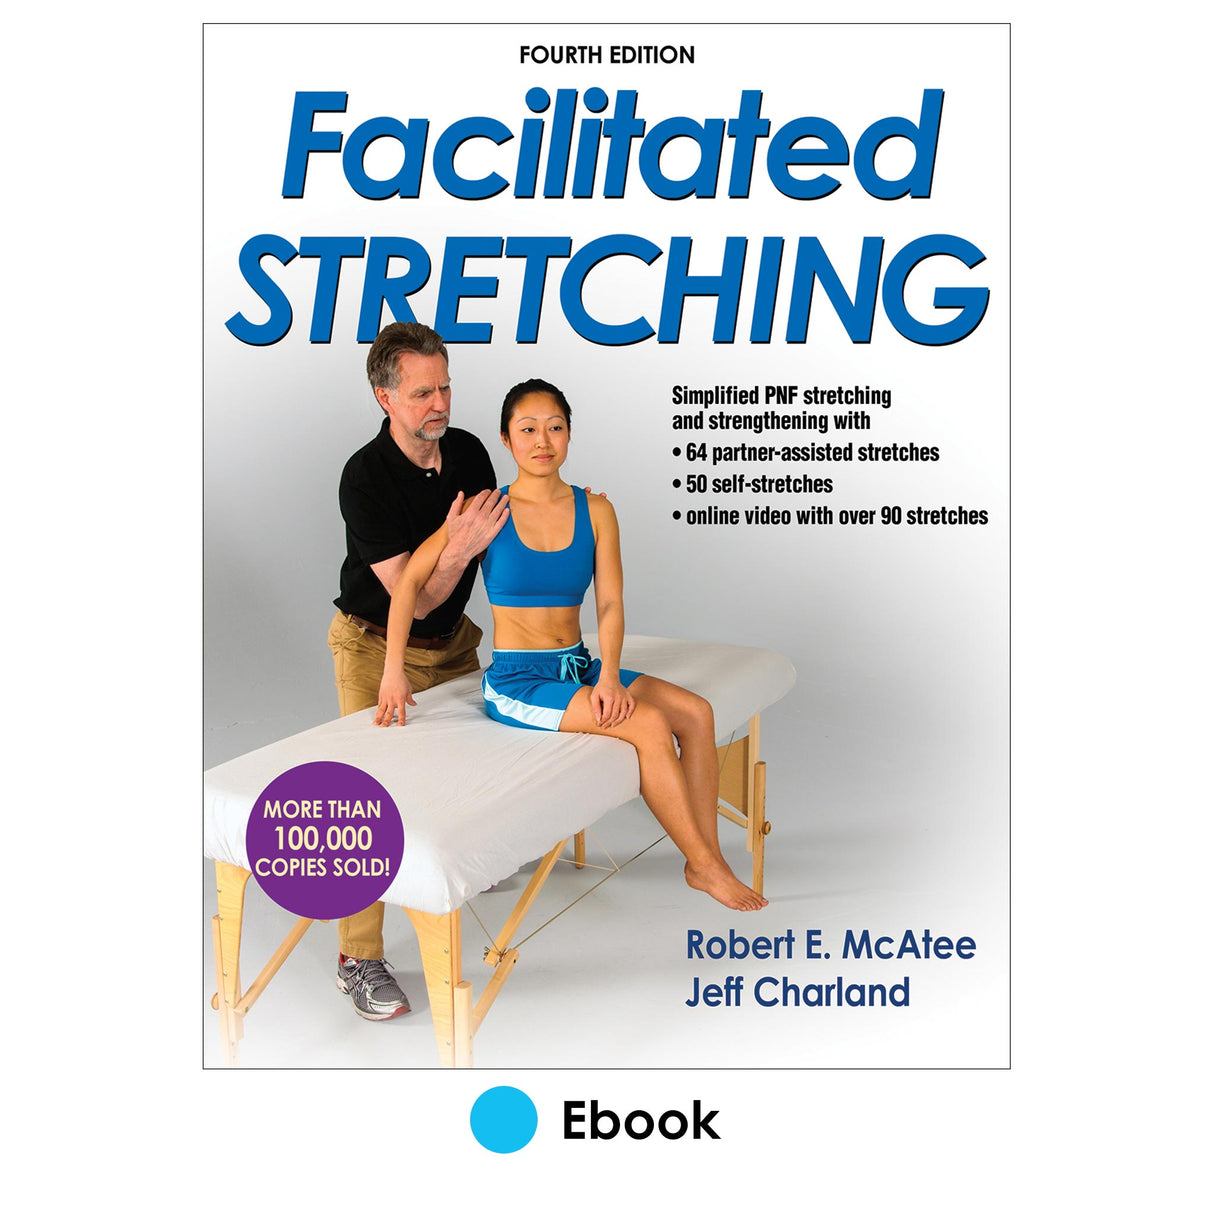 Facilitated Stretching 4th Edition PDF With Online Video